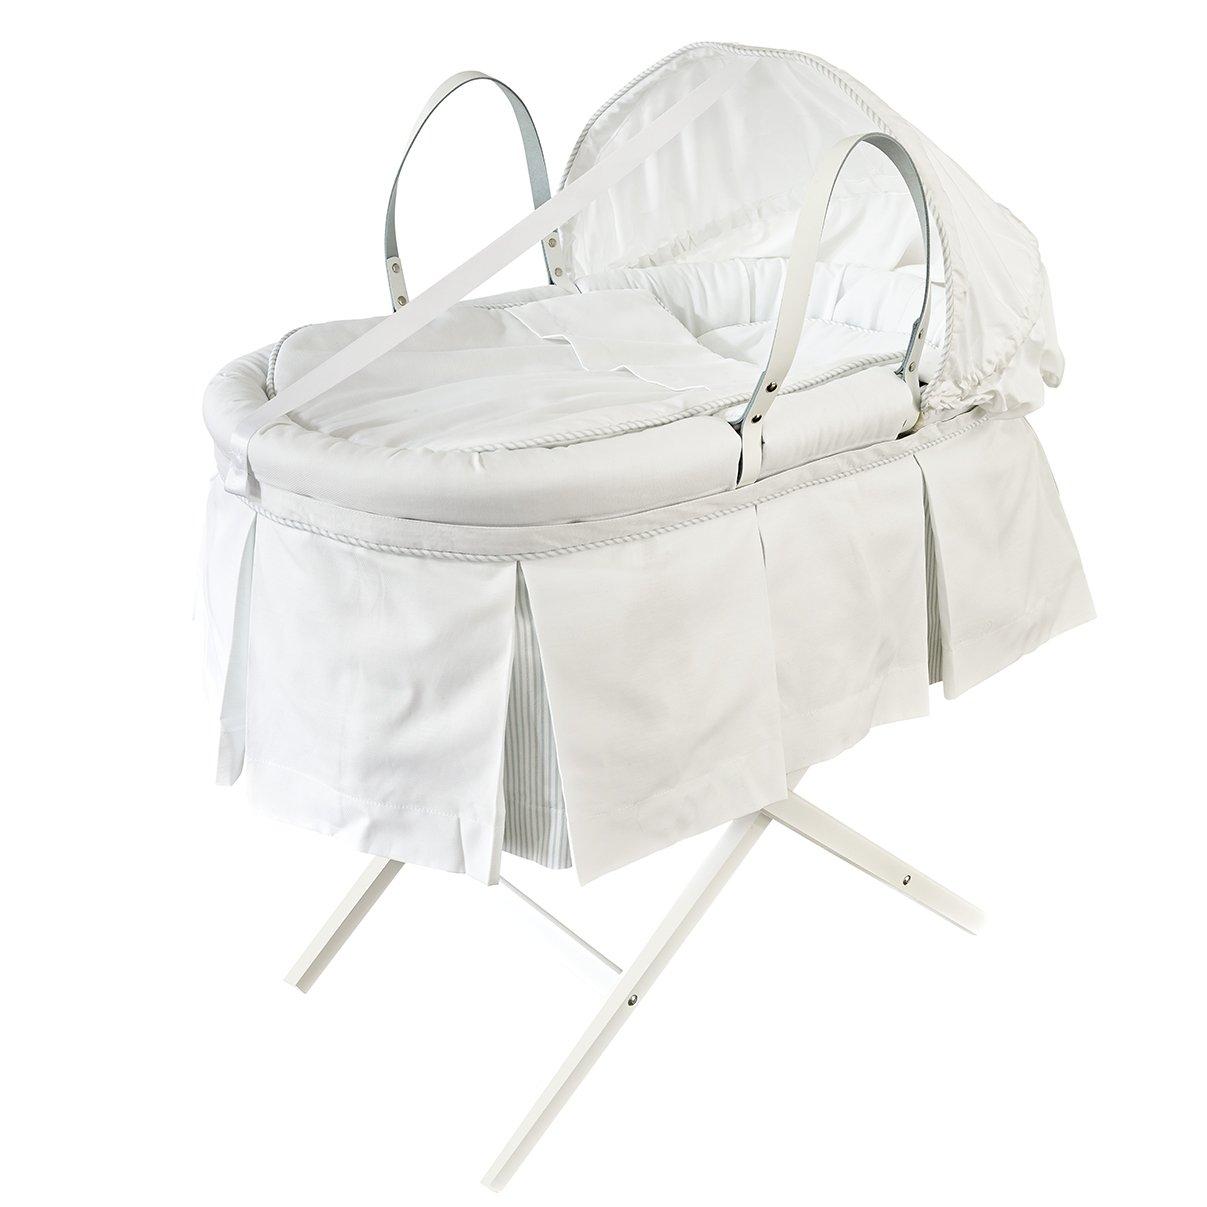 Dragons Moses Basket with a Pleated Skirt - Moses Basket with Hood